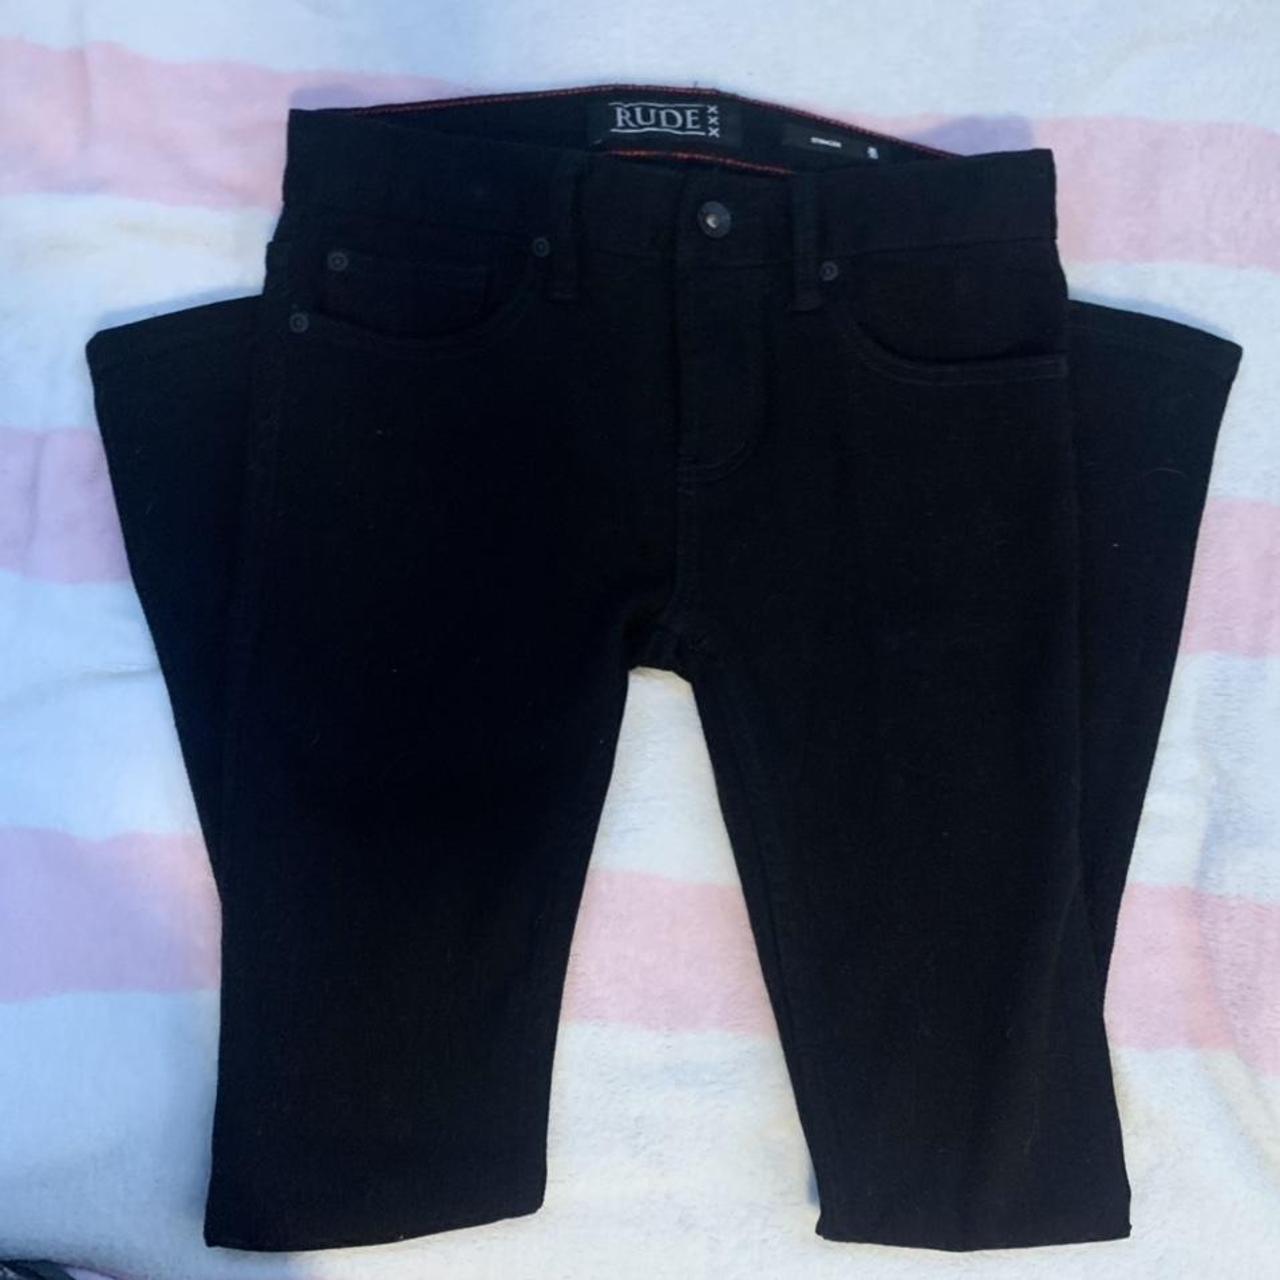 Product Image 2 - emo skinny jeans!


★ ★ ★
emo